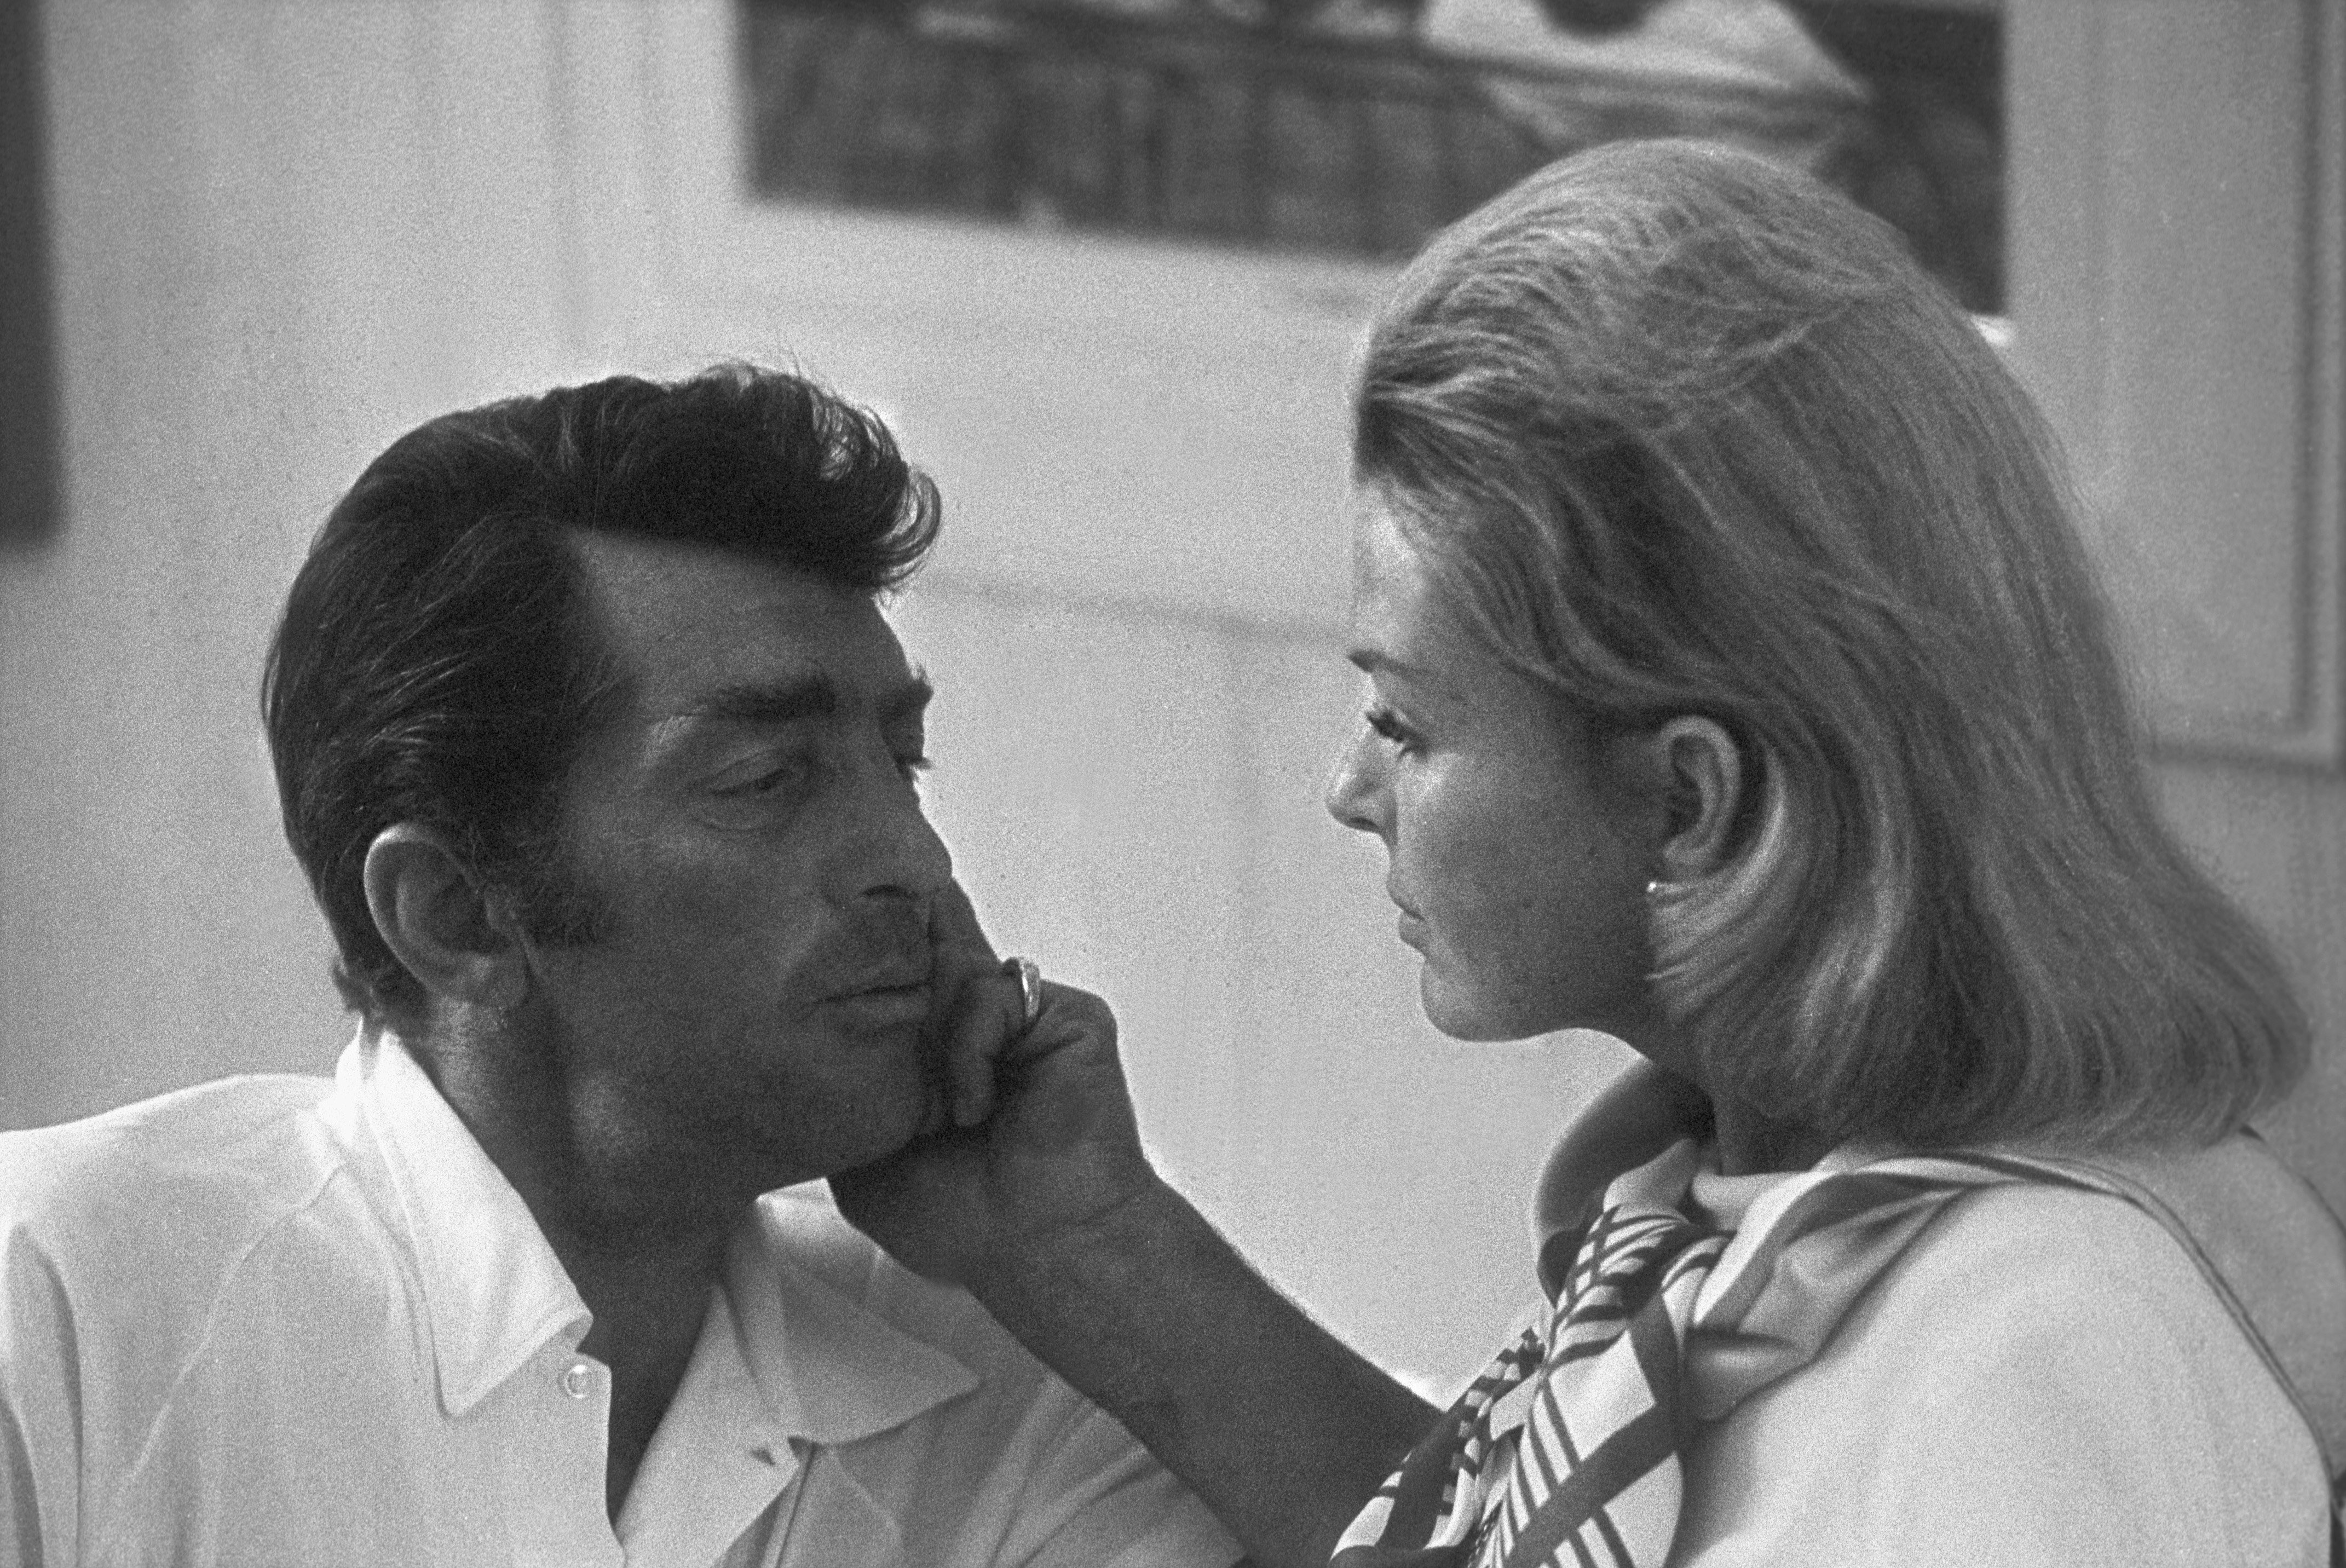 Dean Martin with his ex-wife, Jeanne, pose for a portrait in 1966 in Los Angeles, California. | Source: Getty Images